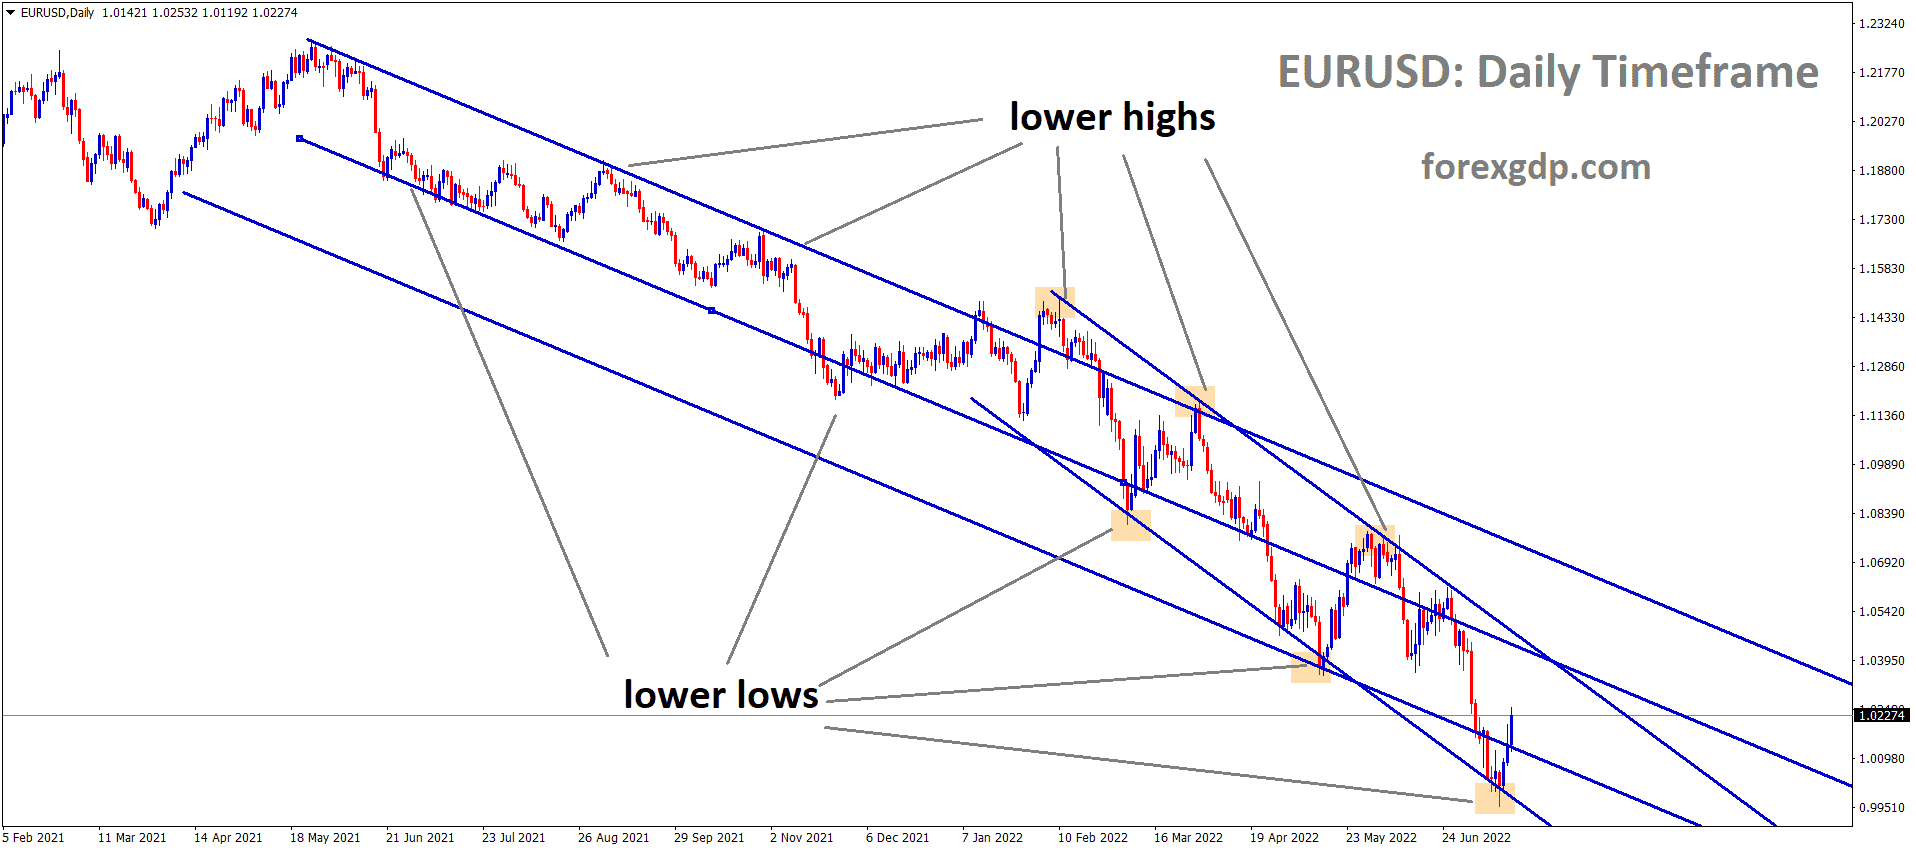 EURUSD is moving in the Descending channel and the market has rebounded from the lower low area of the channel 1